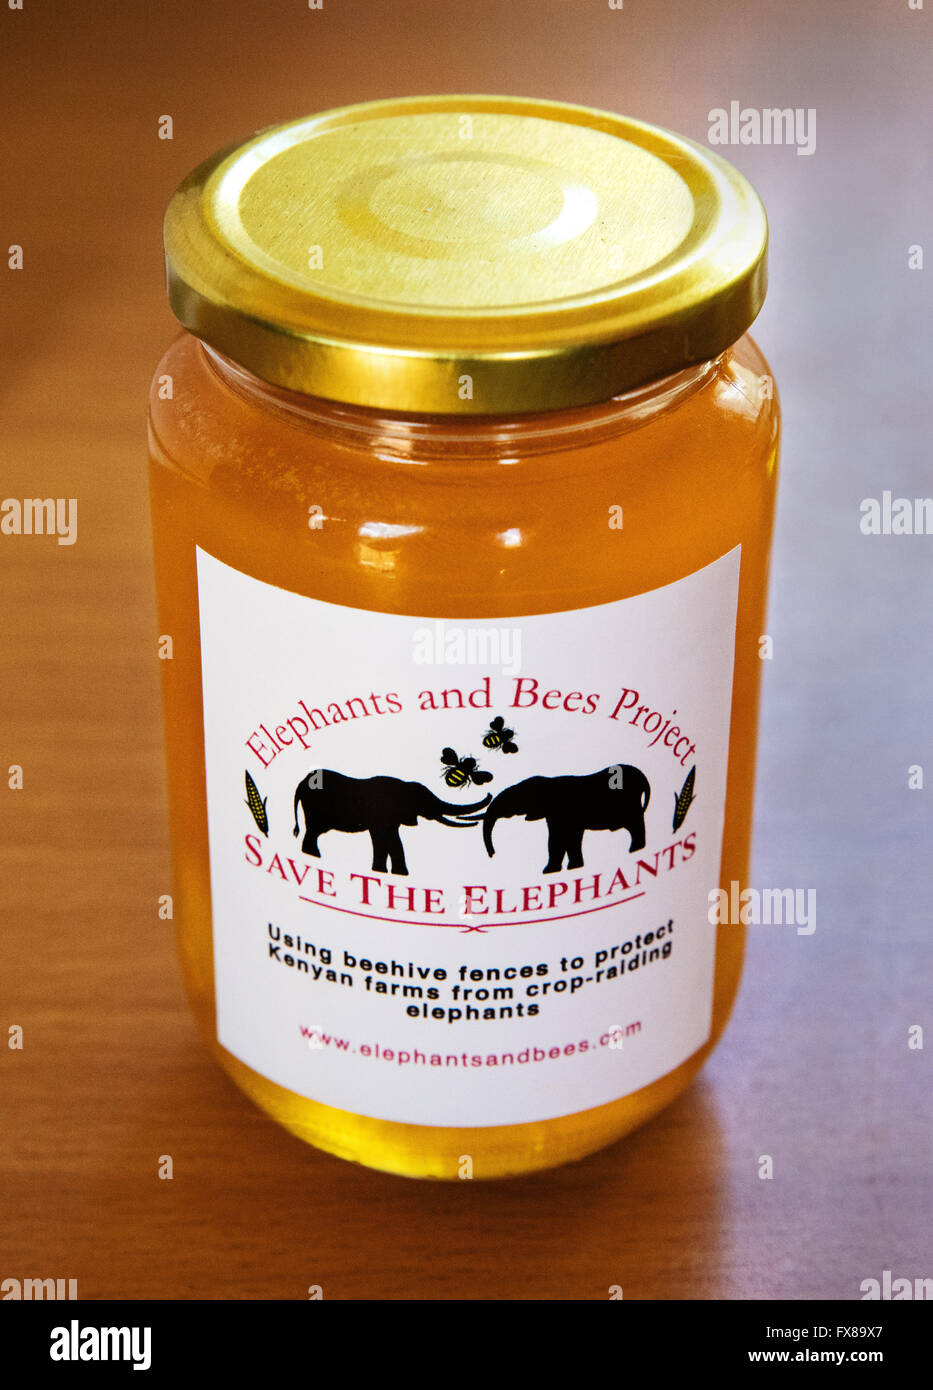 Honey made from elephant beehive fence hives designed to deter crop raiding by elephants in Sagalla region of Kenya Stock Photo